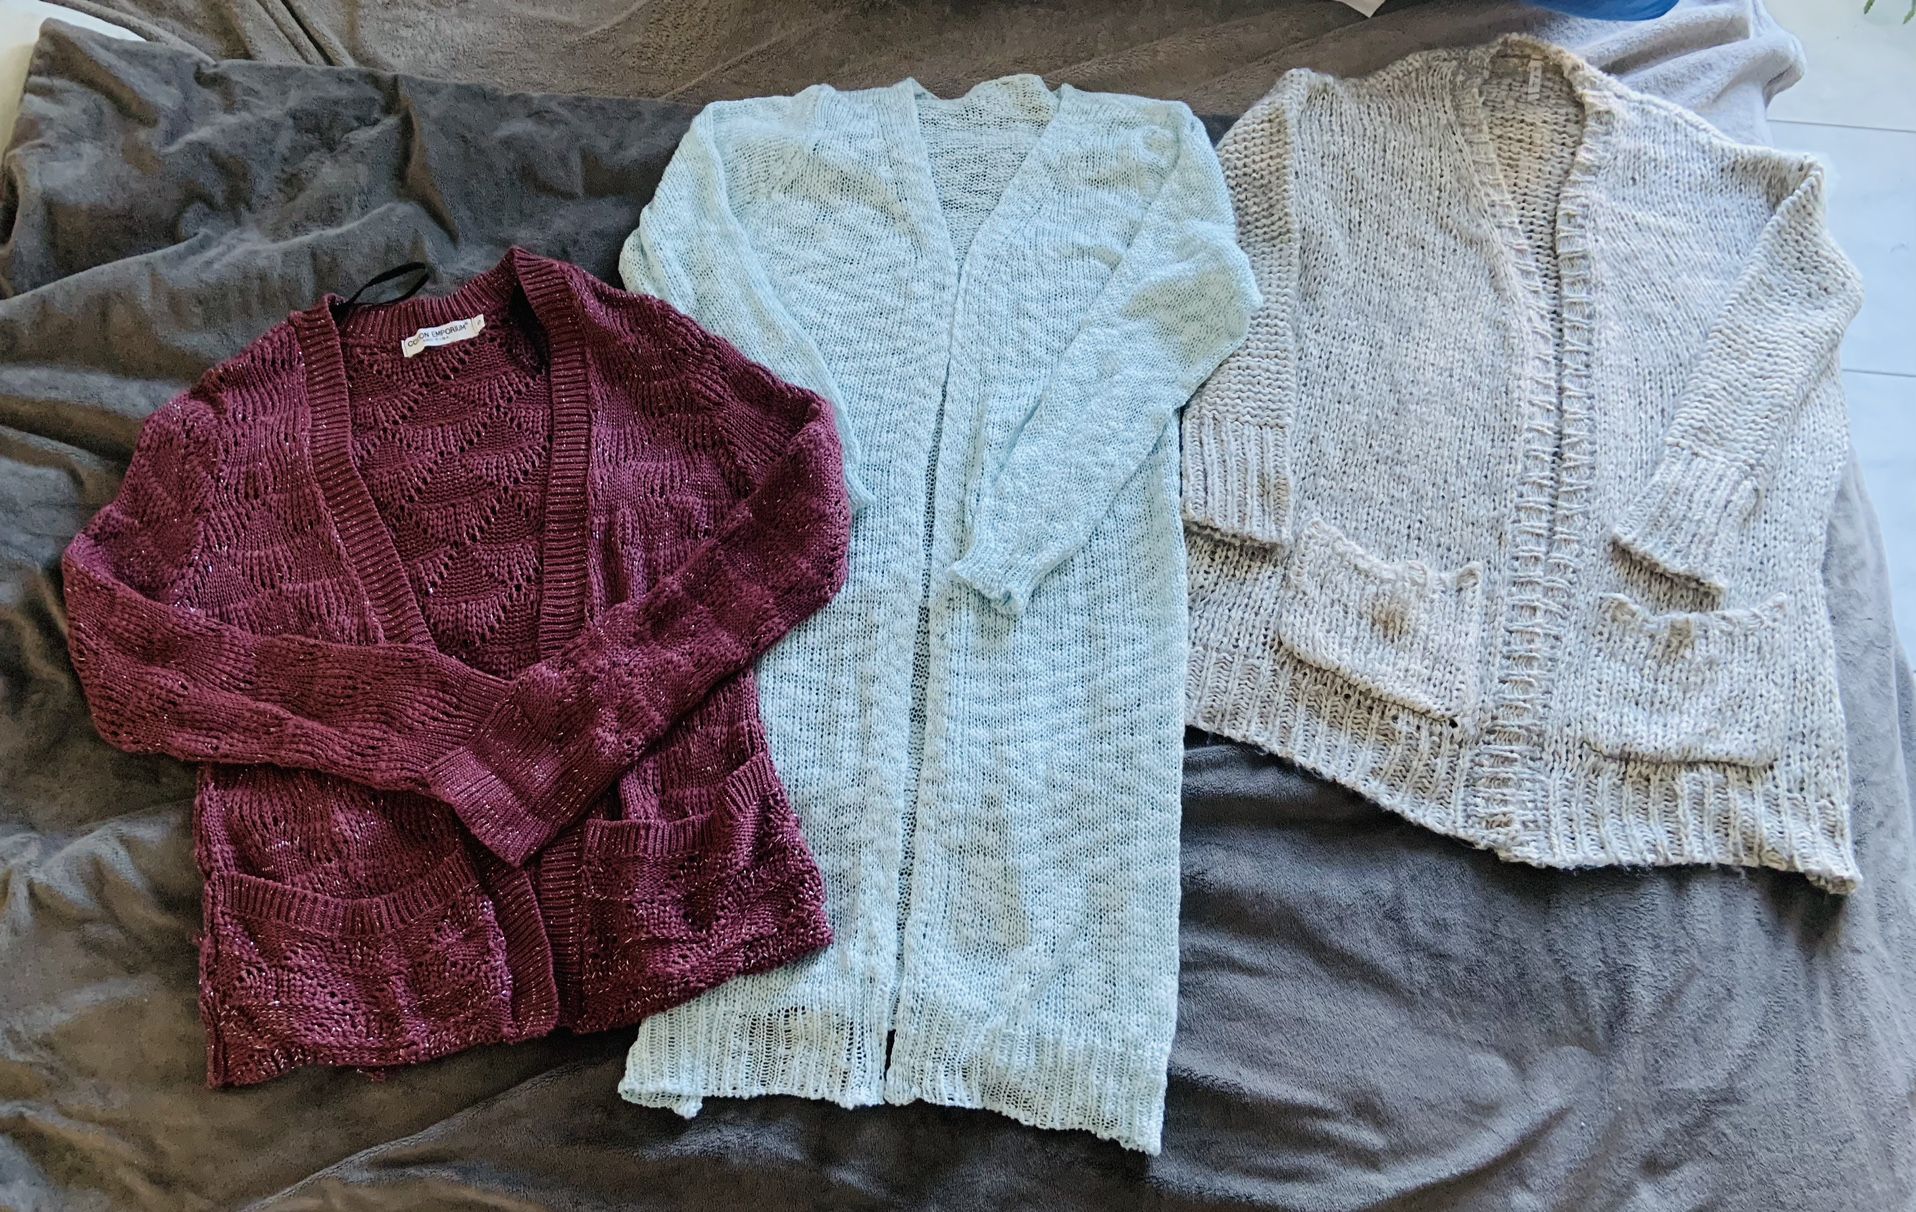 New Sweaters .. Cardigan Style Sweaters $15 Each Size Small 